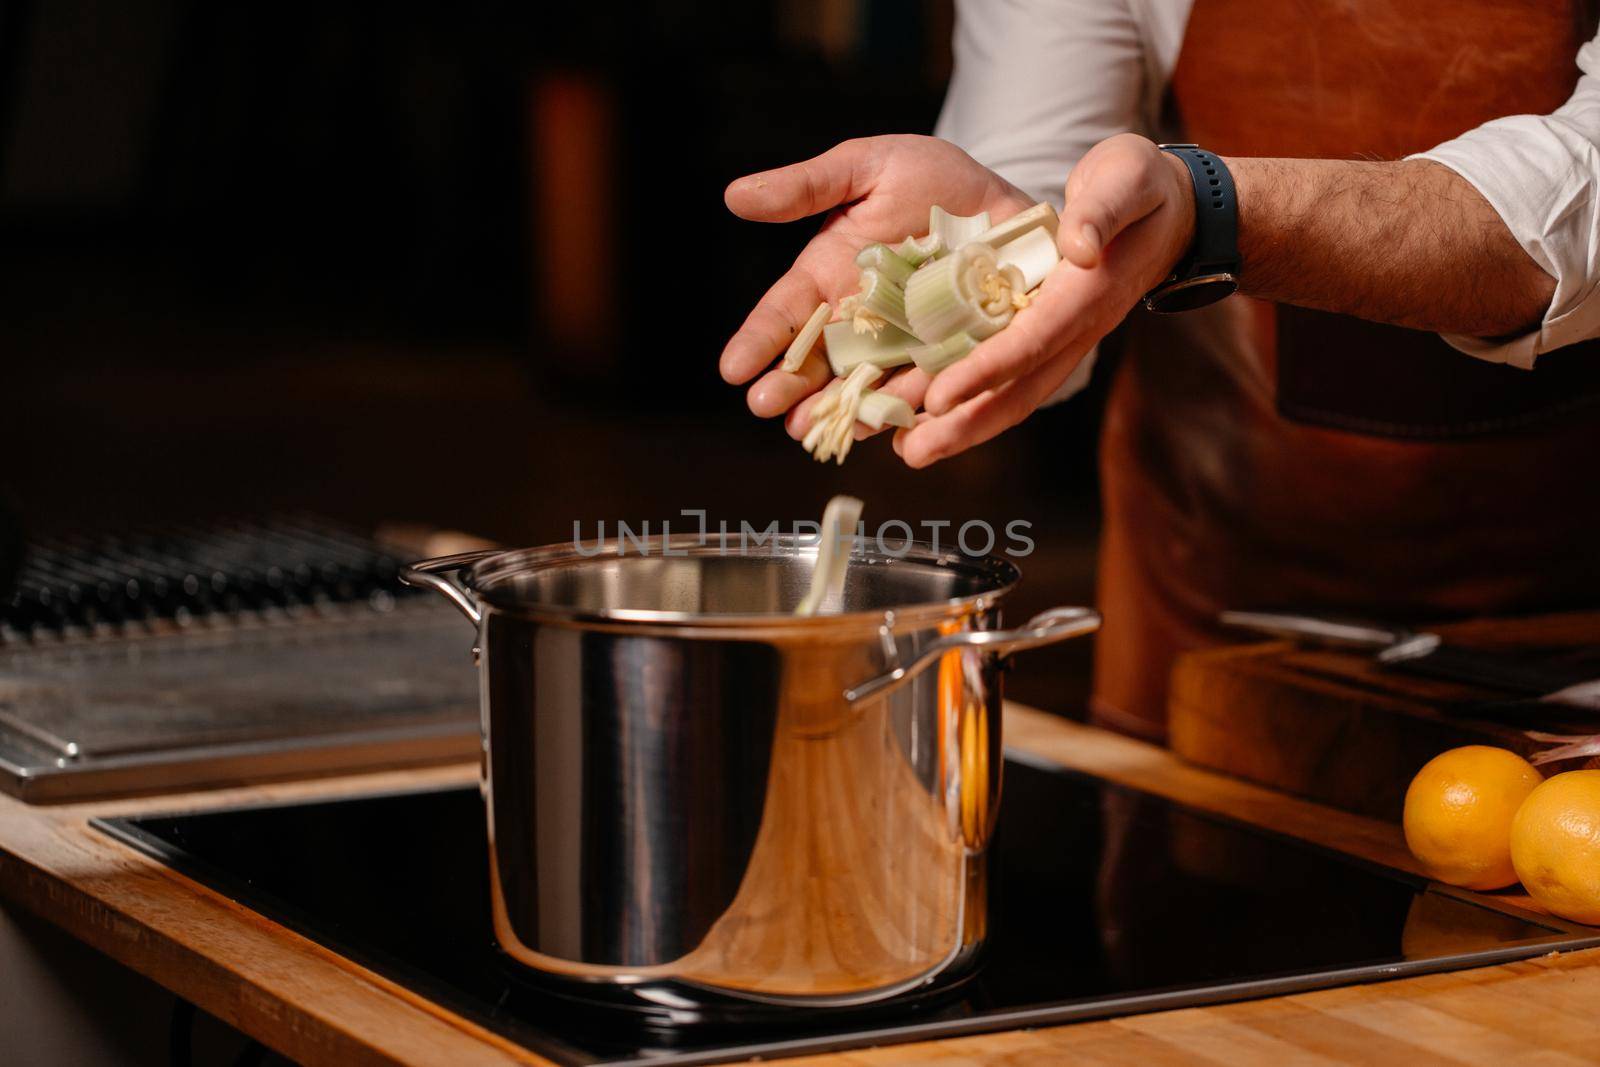 Prepping celery on cutting board ingredients in a large kitchen by RecCameraStock